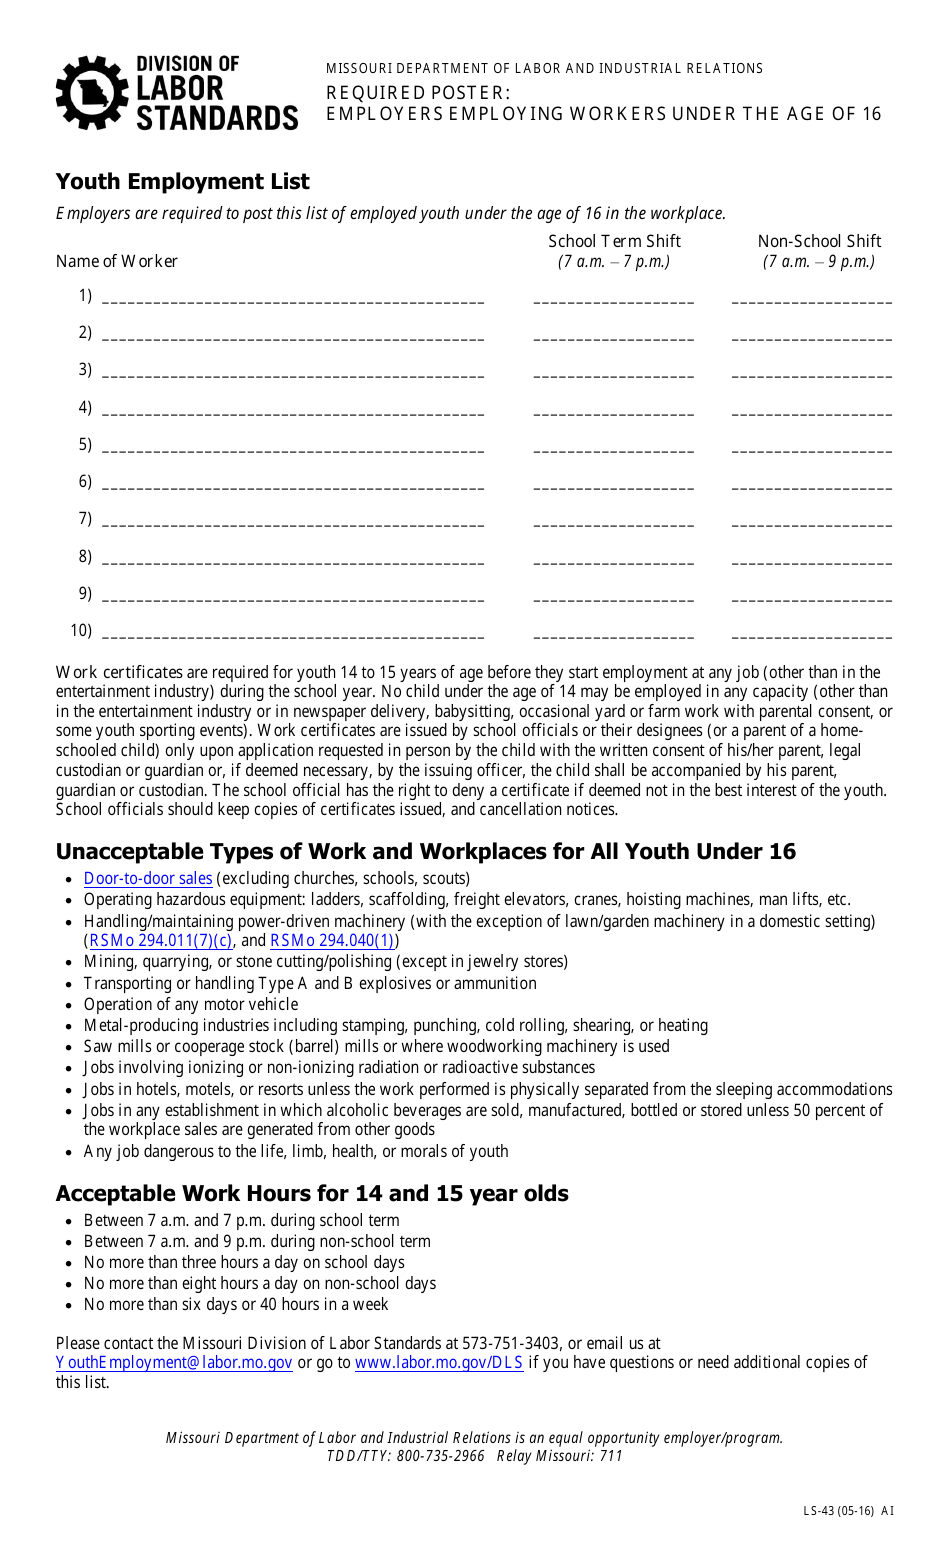 Form LS-43 Employers Employing Workers Under the Age of 16 - Required Poster - Missouri, Page 1